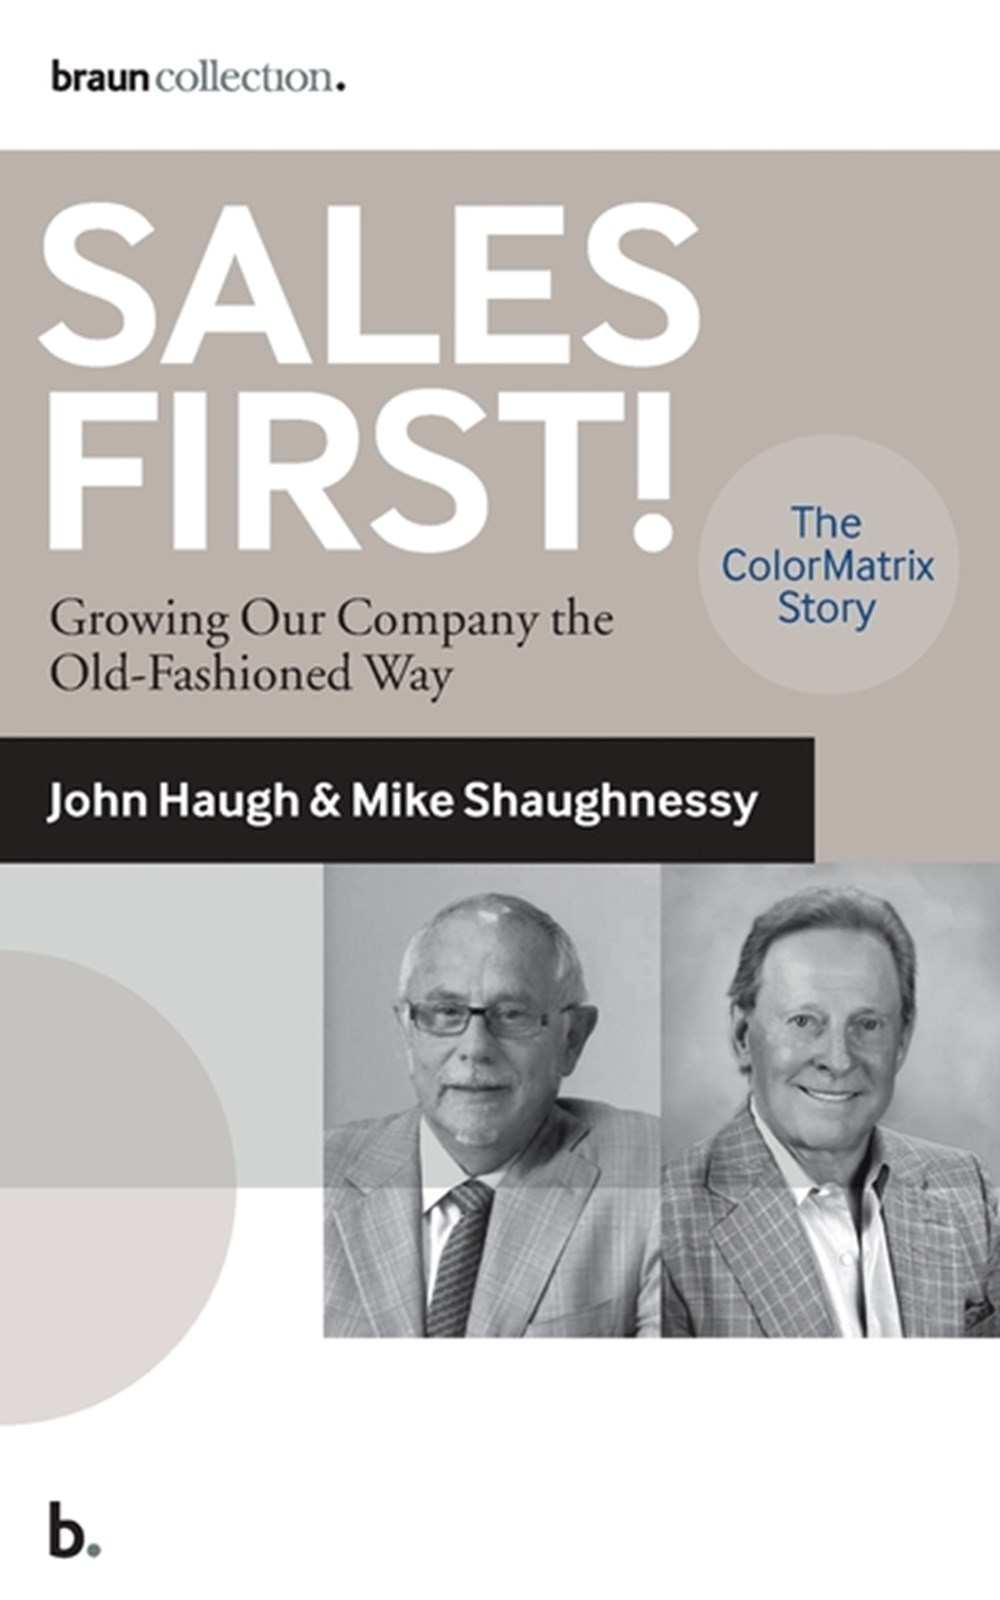 Sales First! Growing Our Company the Old-Fashioned Way, the ColorMatrix Story